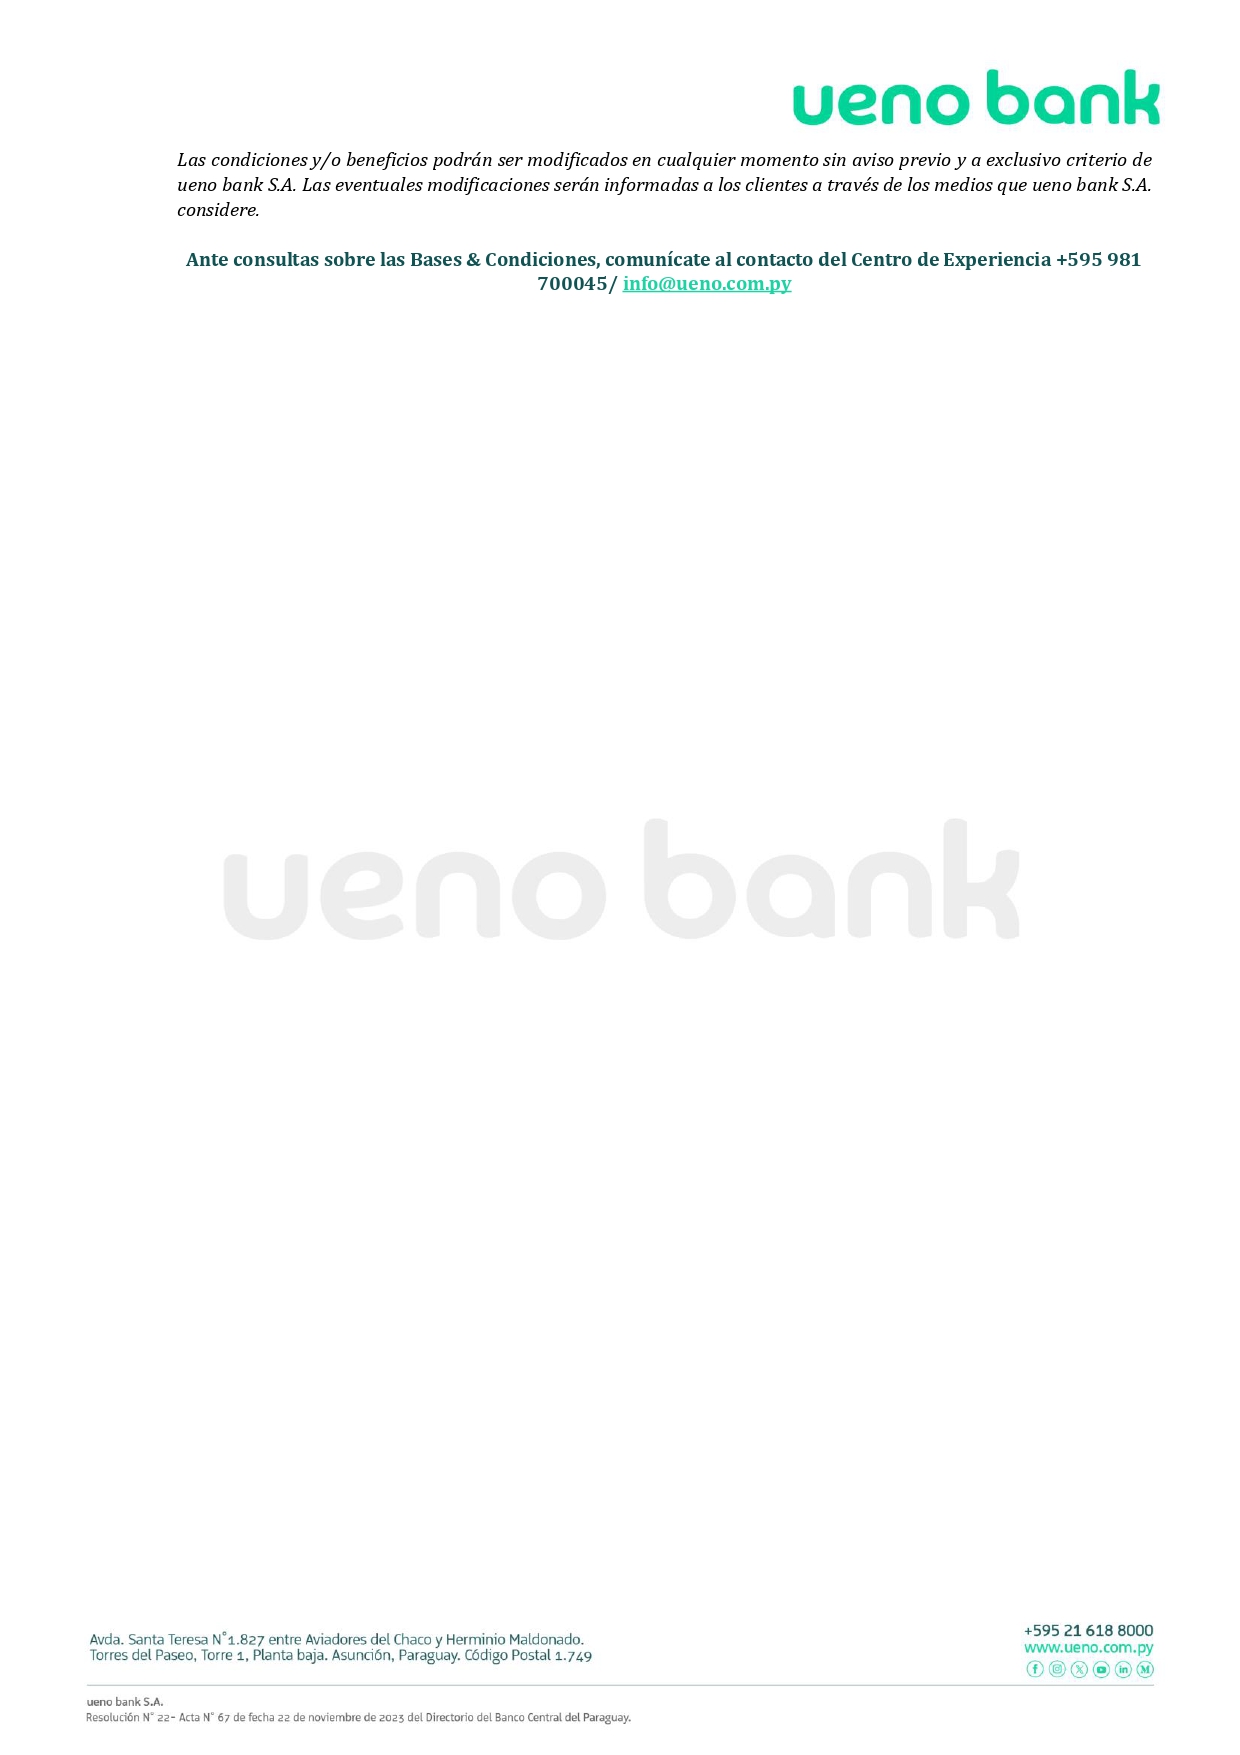 ByC -  Vuelta a clases con ueno bank (1)_page-0012.jpg